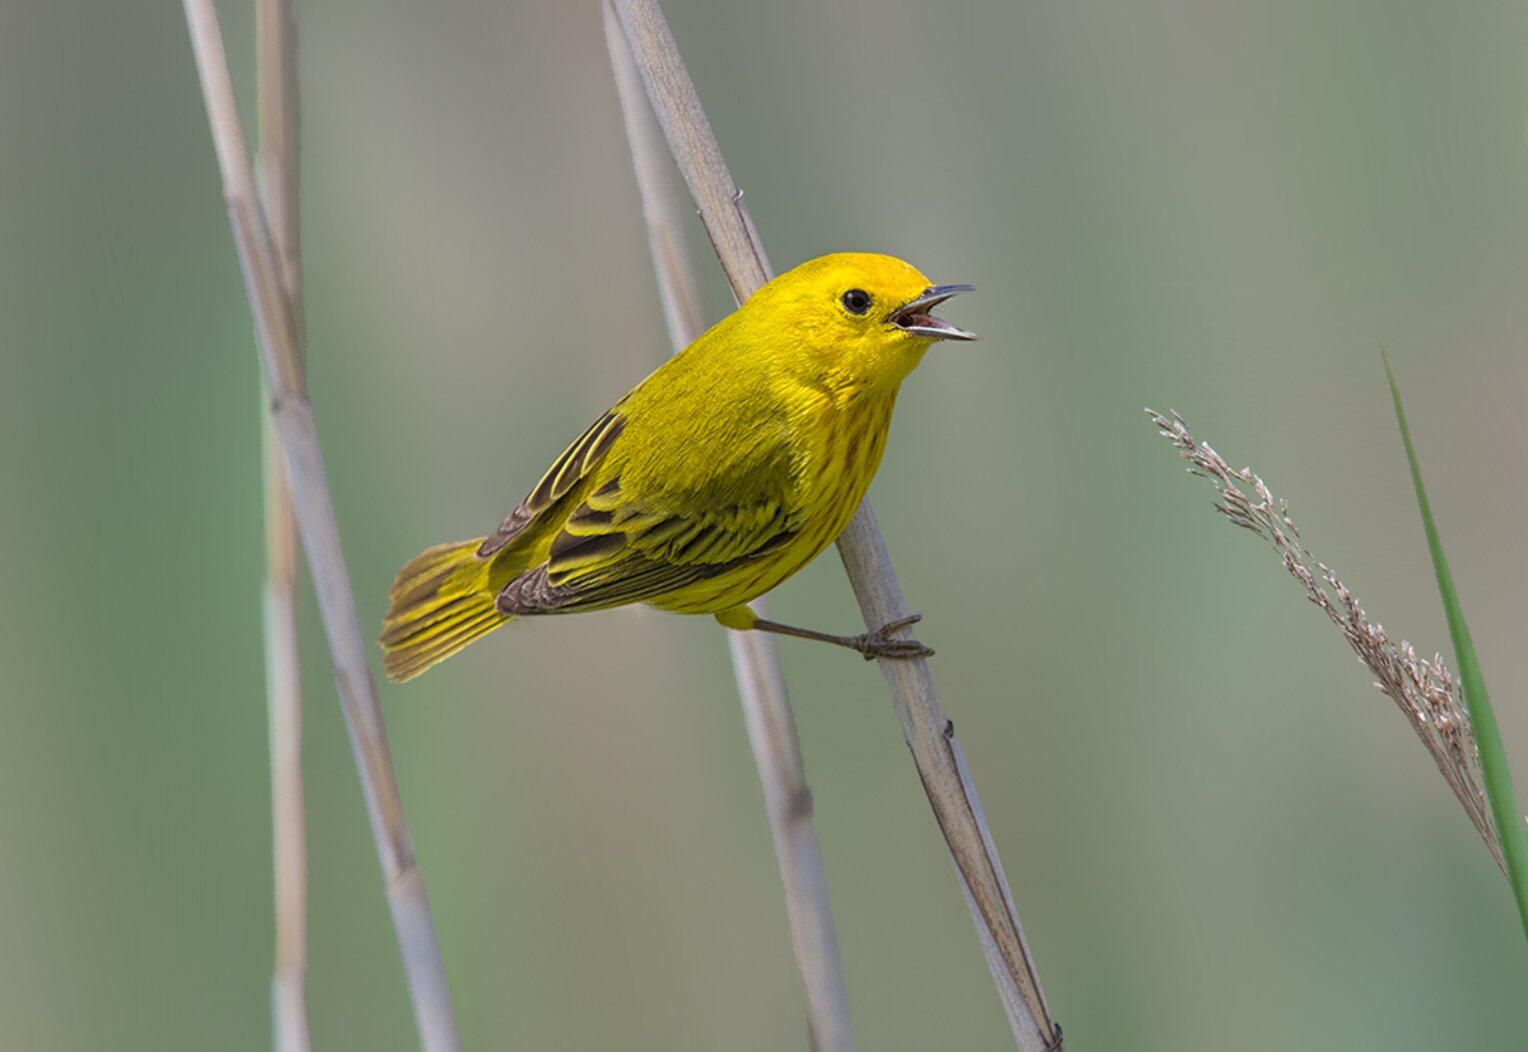 Yellow Warblers are among the songbirds that likely breed in Sound View Park. Photo: David Speiser